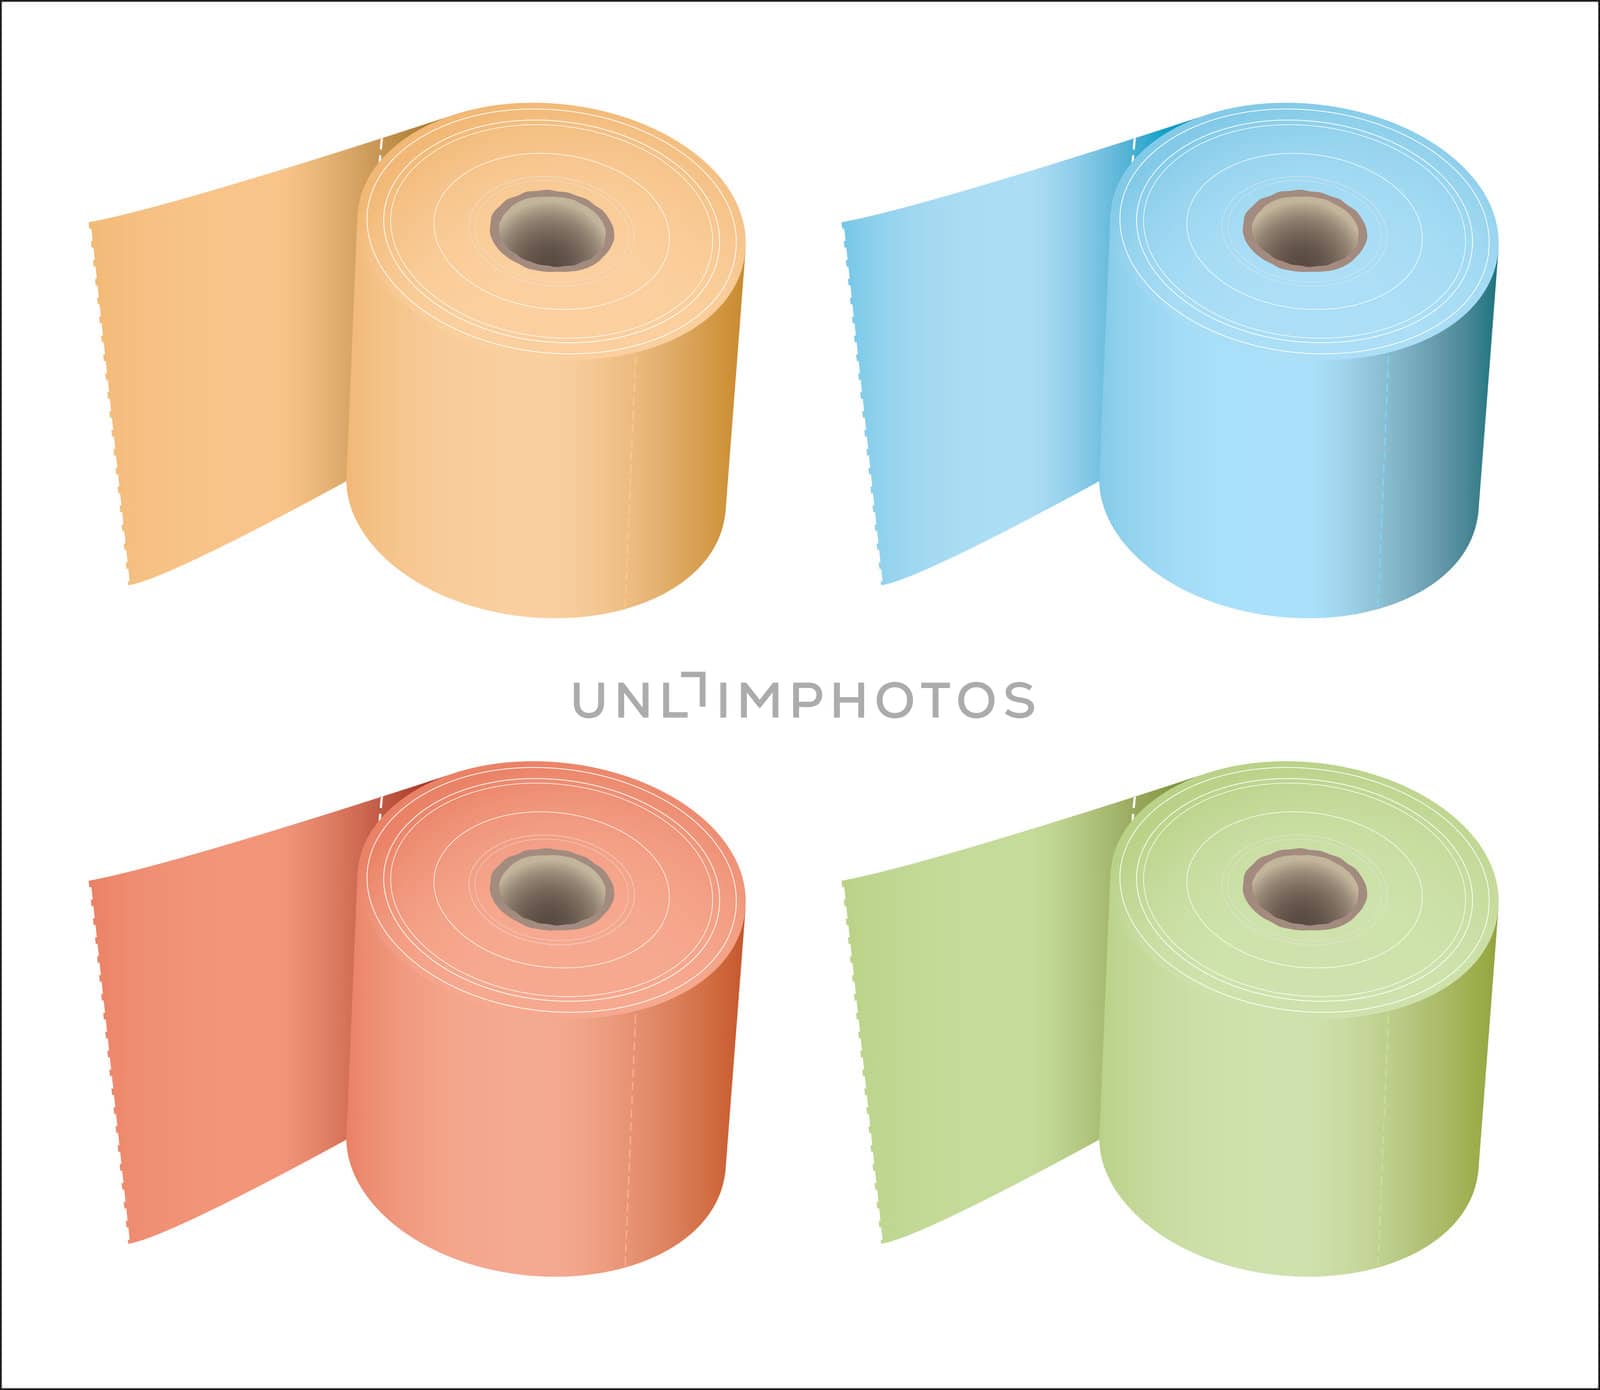 Toilet roll collection by nicemonkey